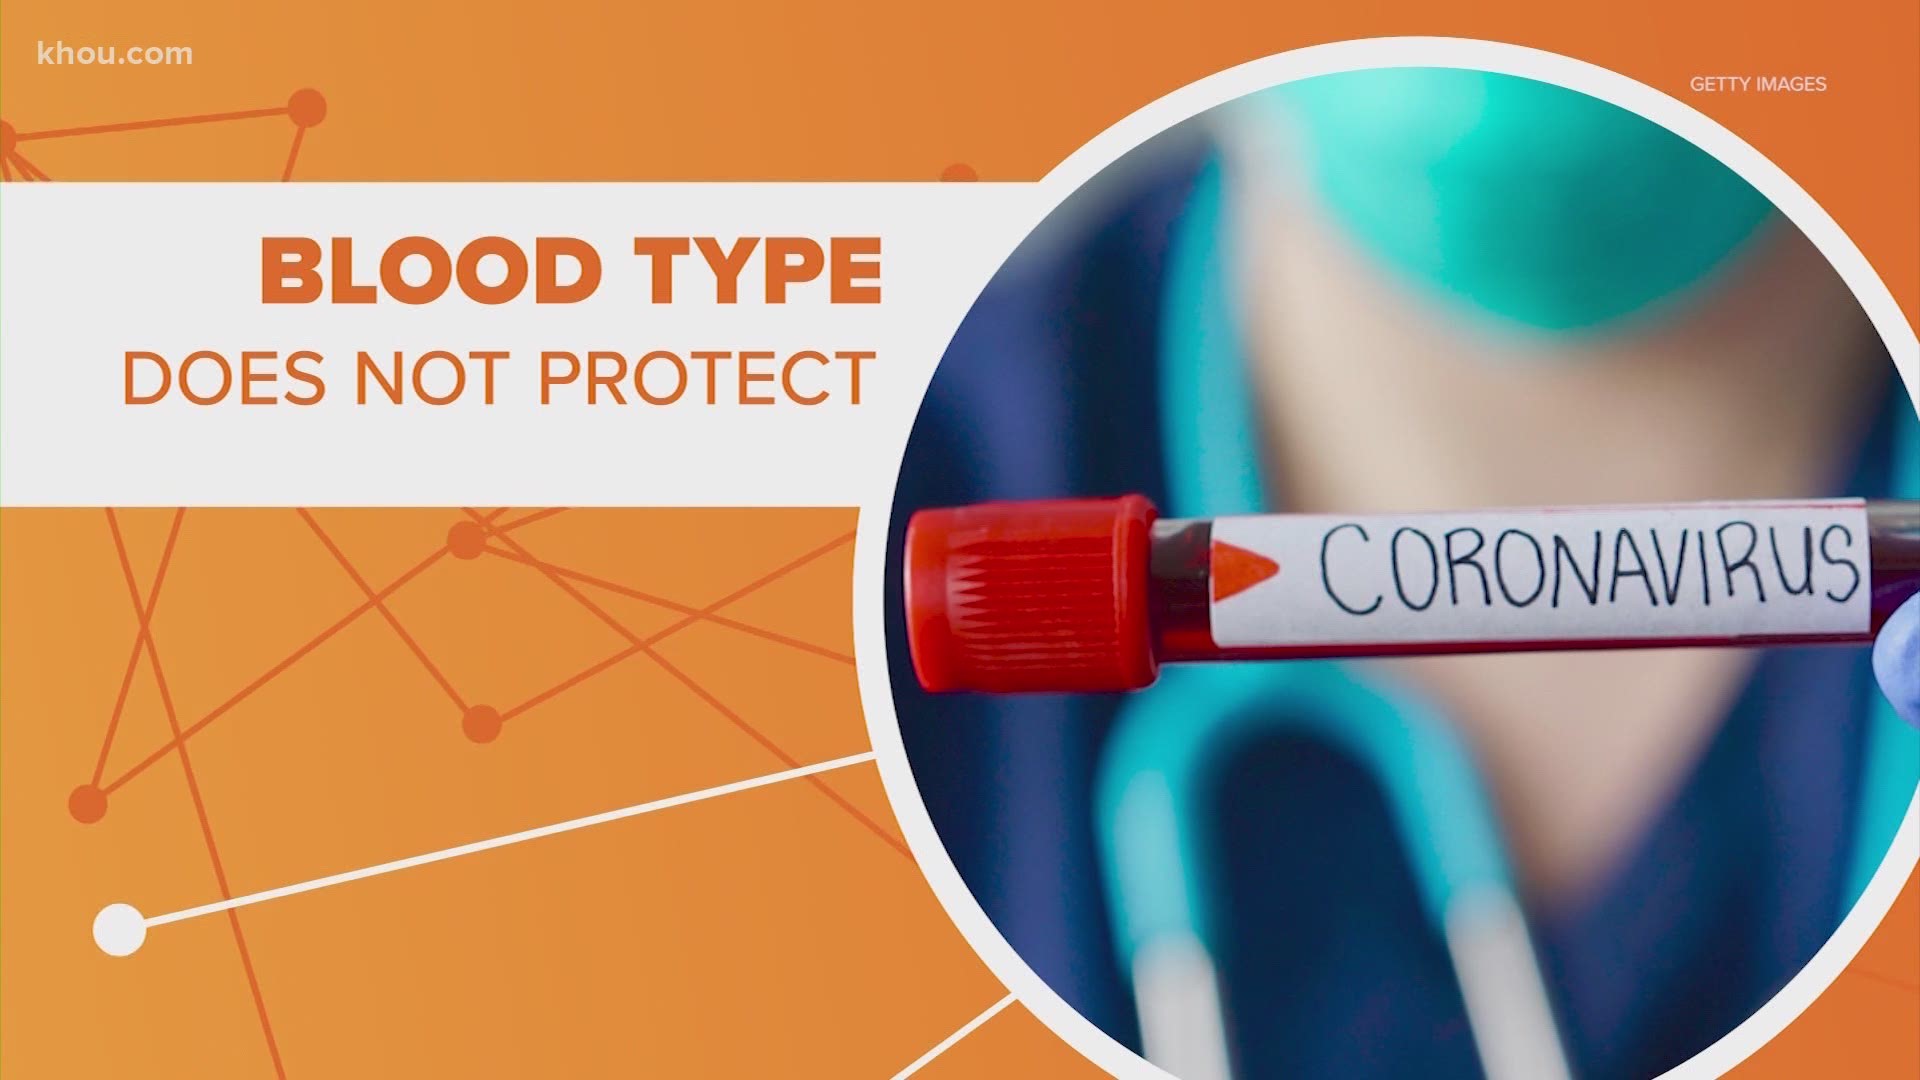 New research explains the possible link between our blood type and the coronavirus.